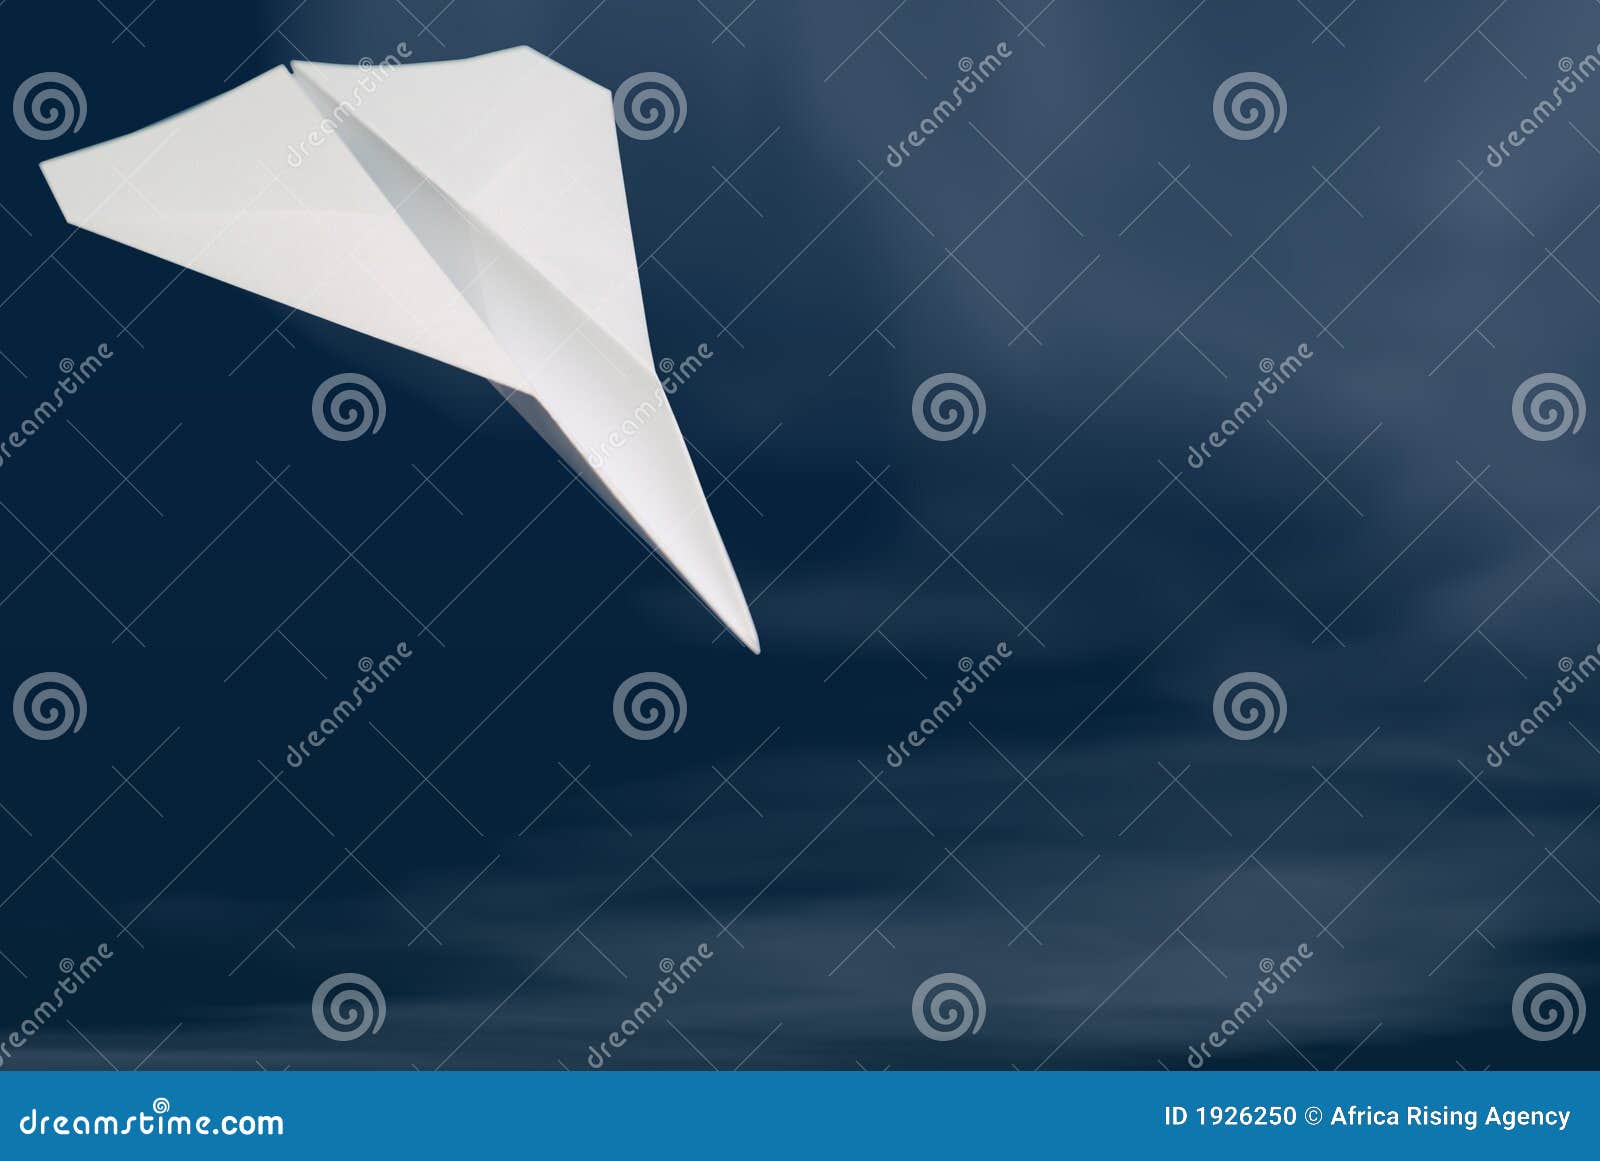 Paper Aeroplane on Blue Sky with Clouds Stock Photo - Image of airplane ...